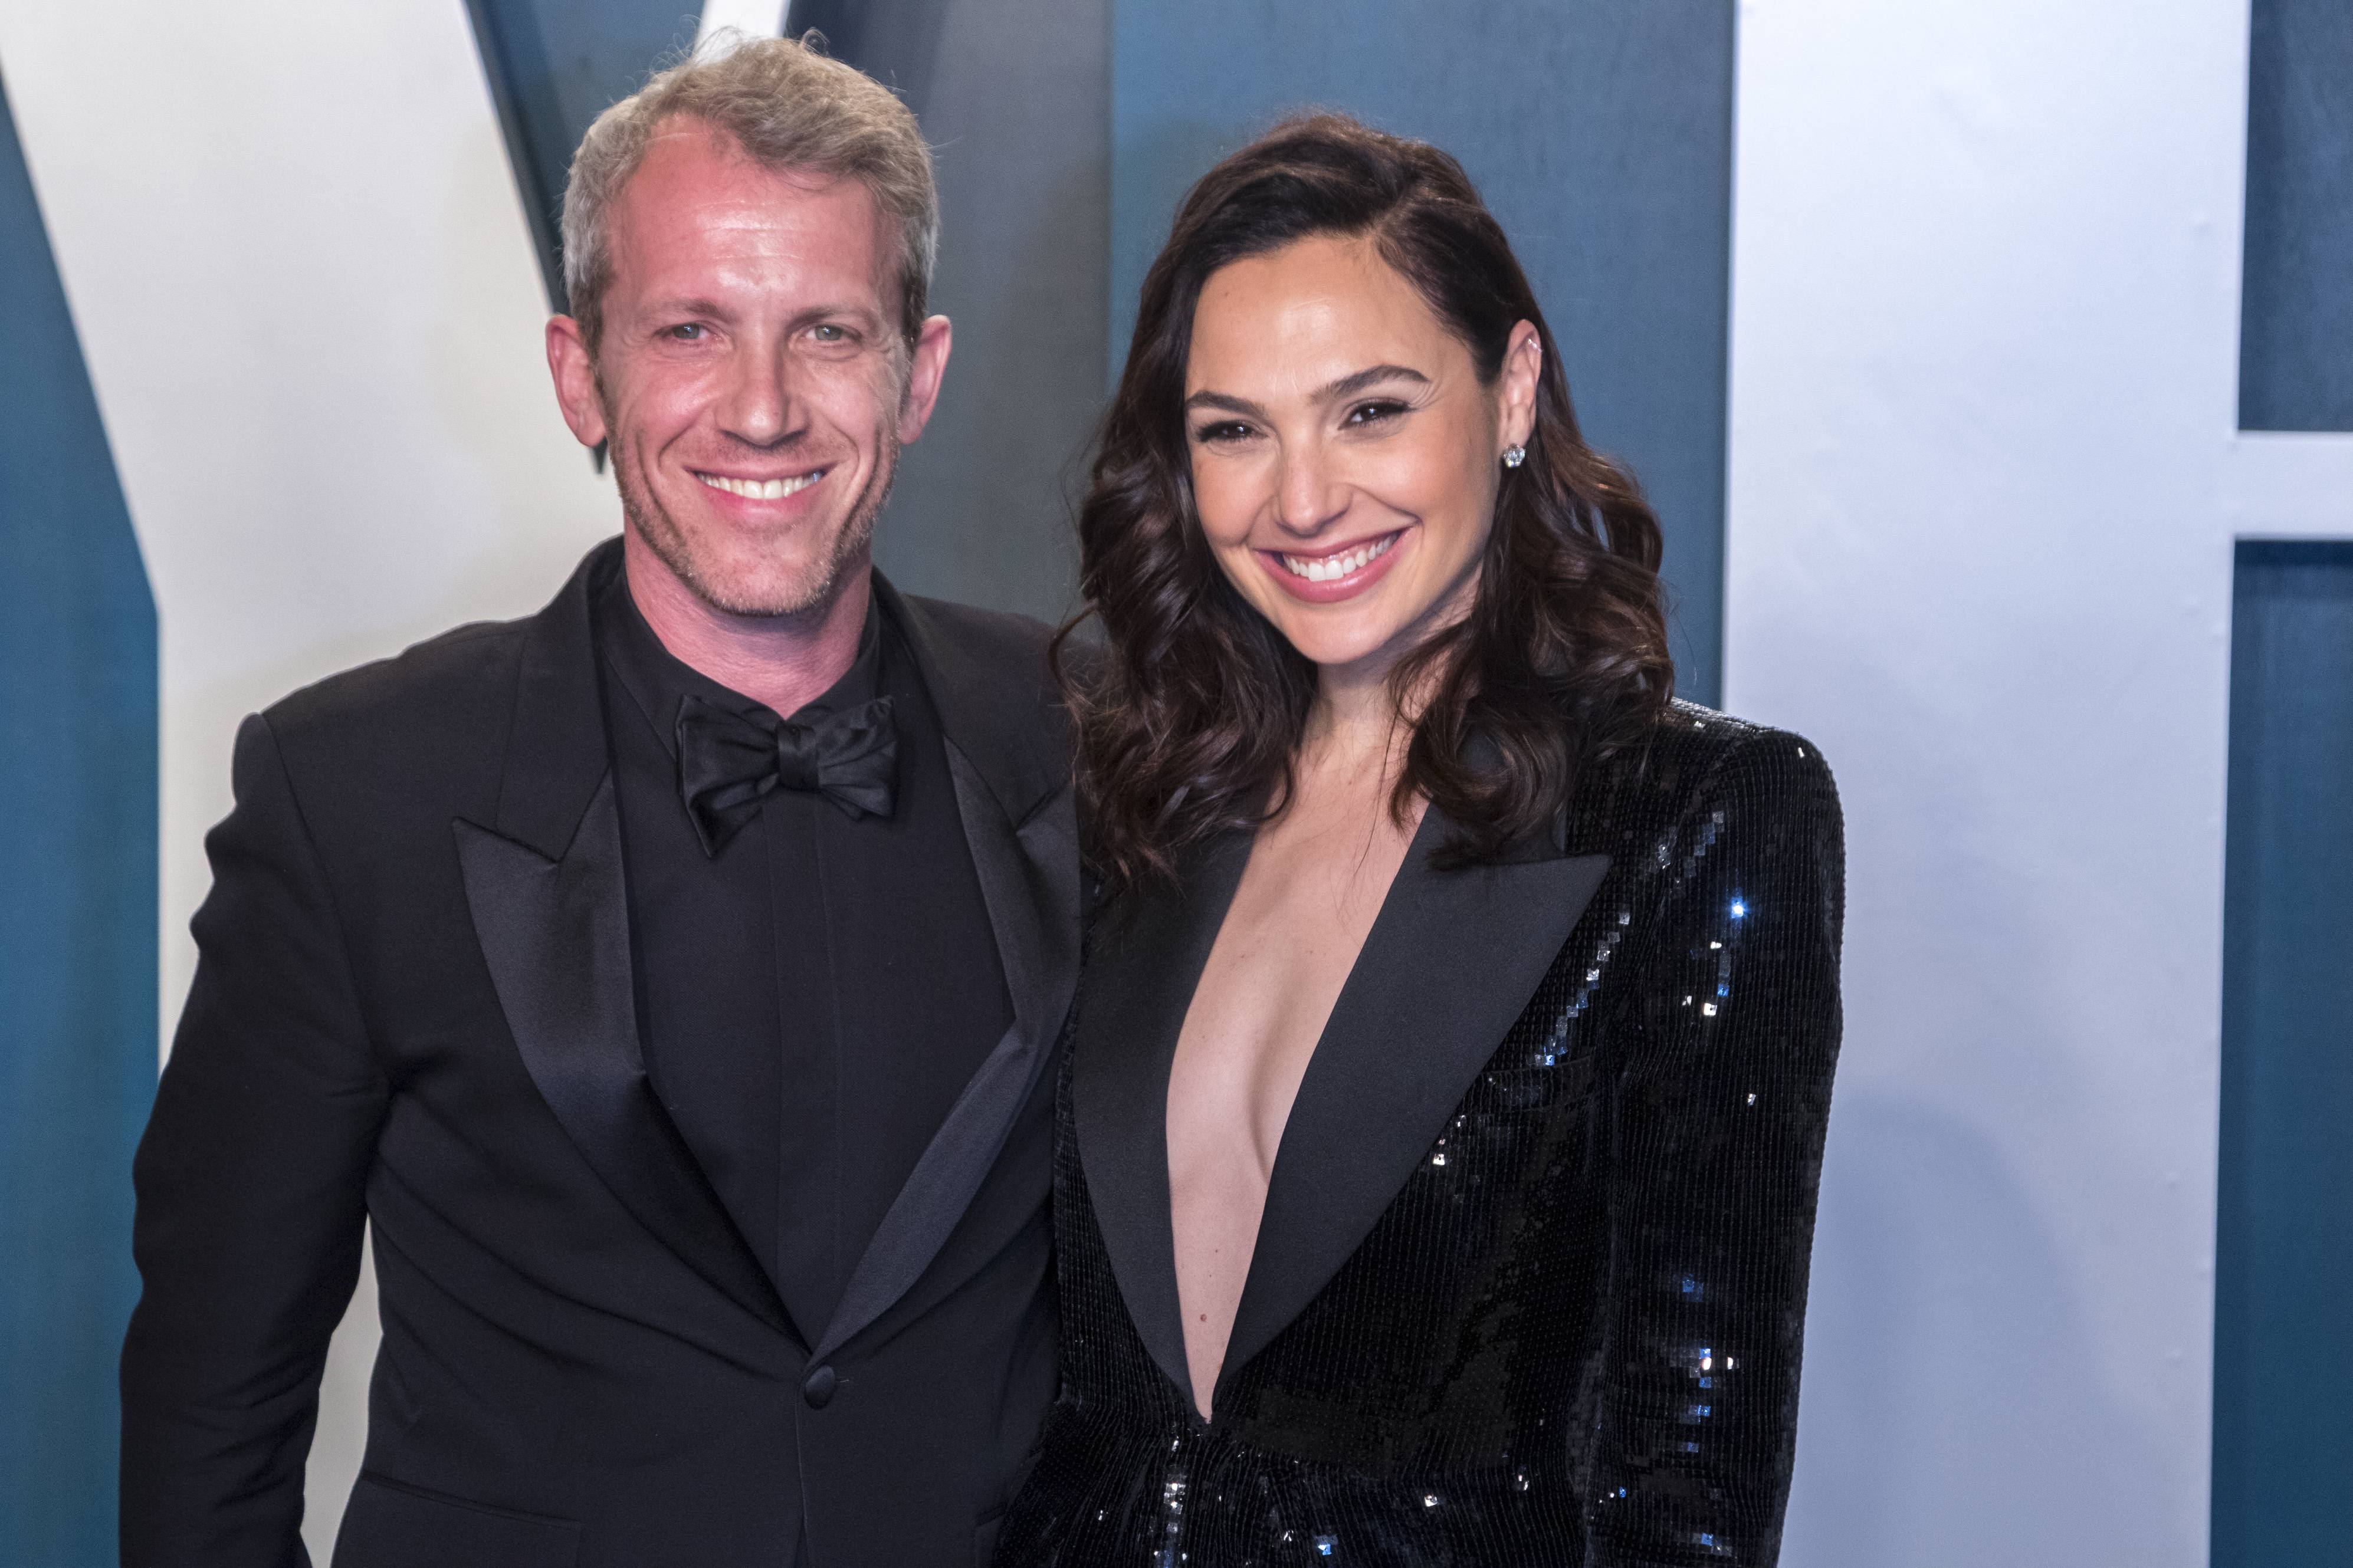 Yaron Varsano and Gal Gadot (r) attend the Vanity Fair Oscar Party at Wallis Annenberg Center for th...